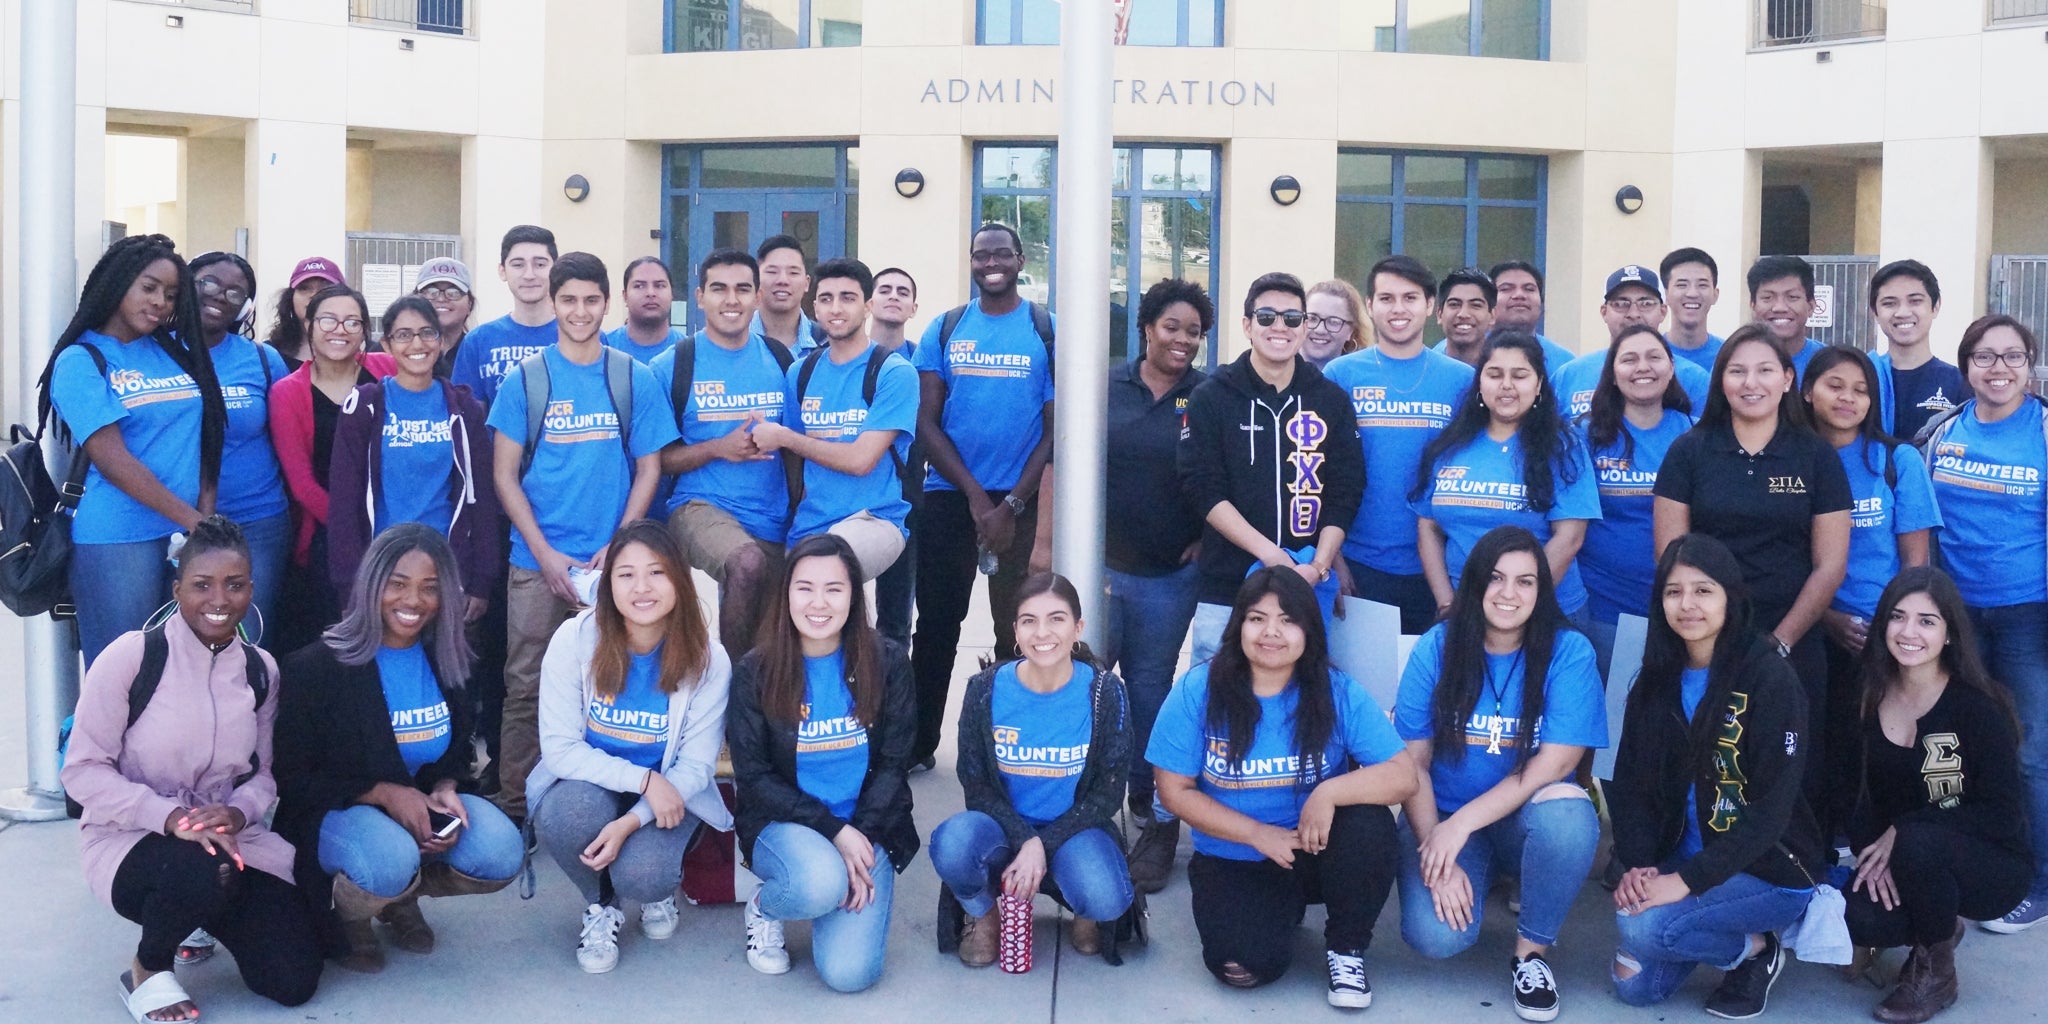 A group of UCR student volunteers pose together during a community service project.